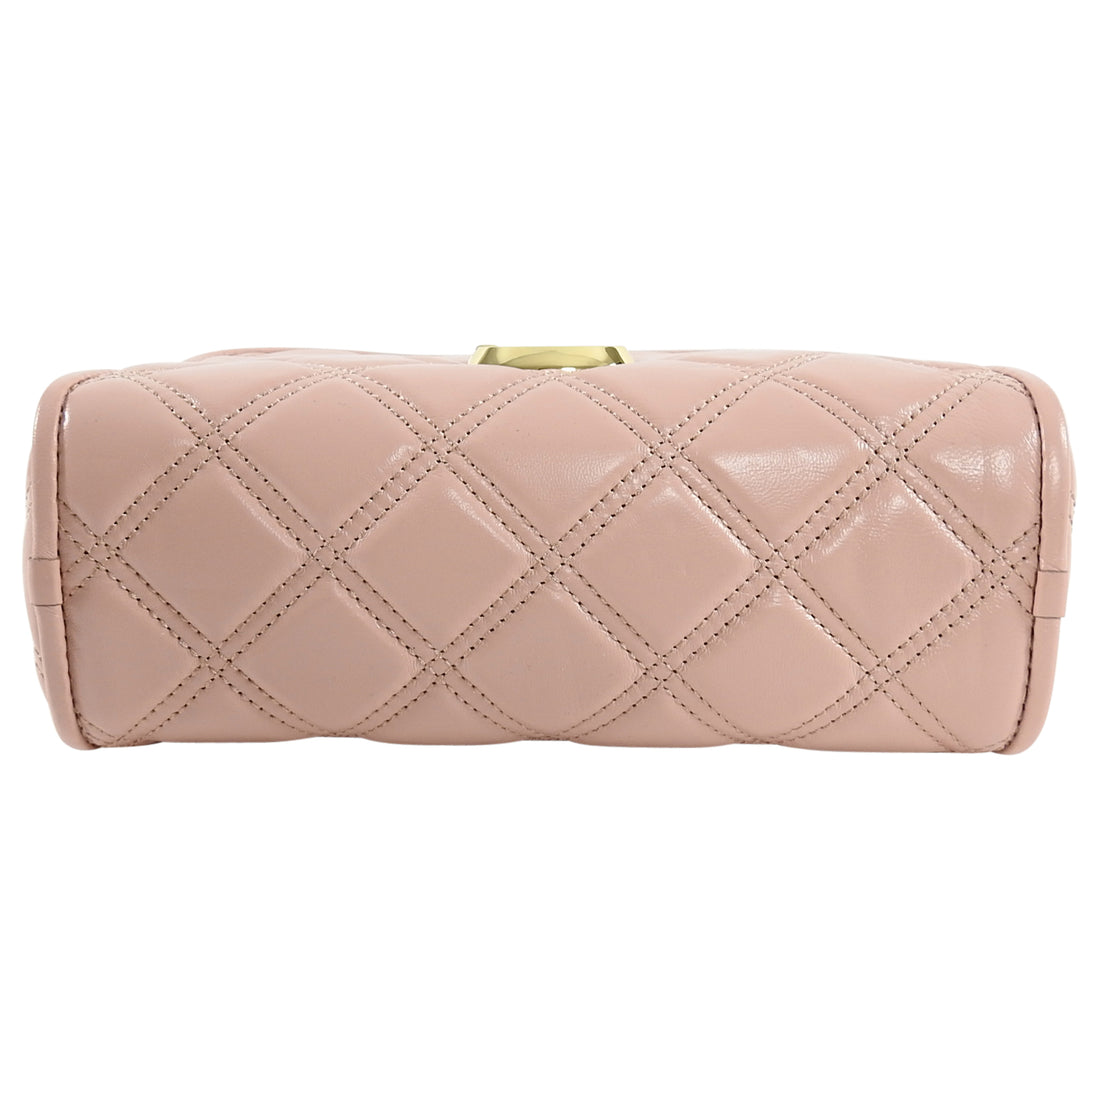 MARC JACOBS: The Softshot 21 bag in quilted leather - Nude